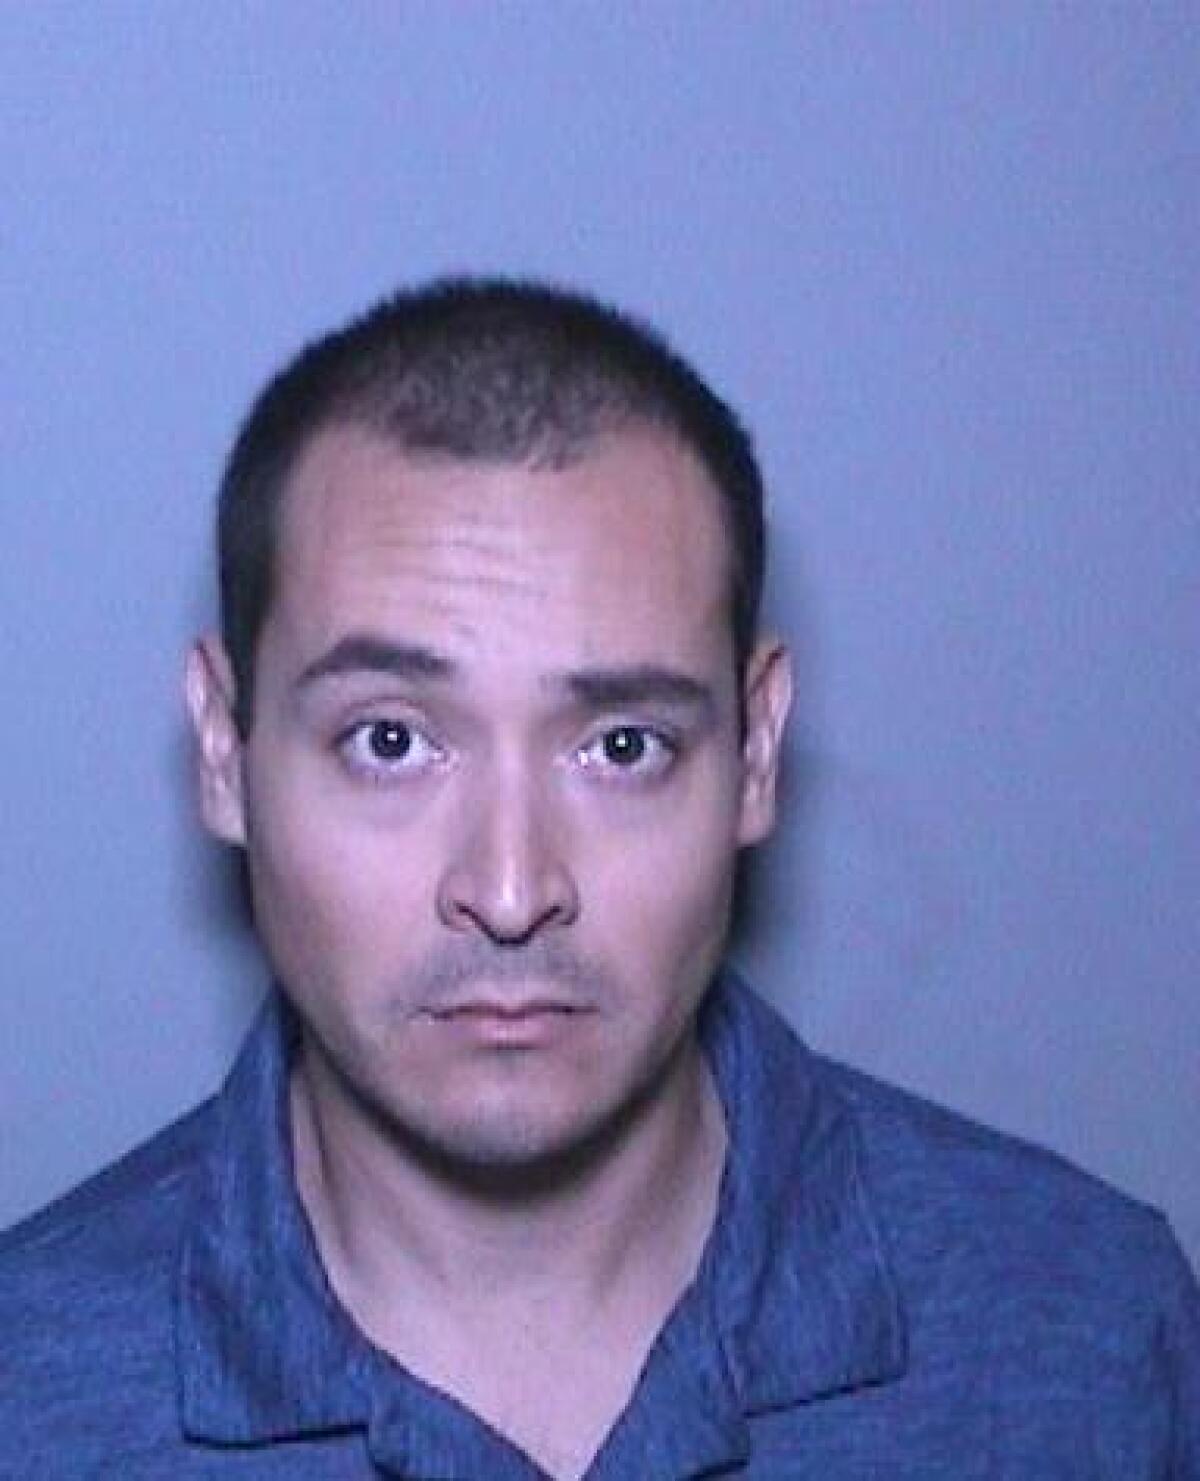 Christopher Lopez, 30, was arrested in connection with a child groping case in Aliso Viejo.